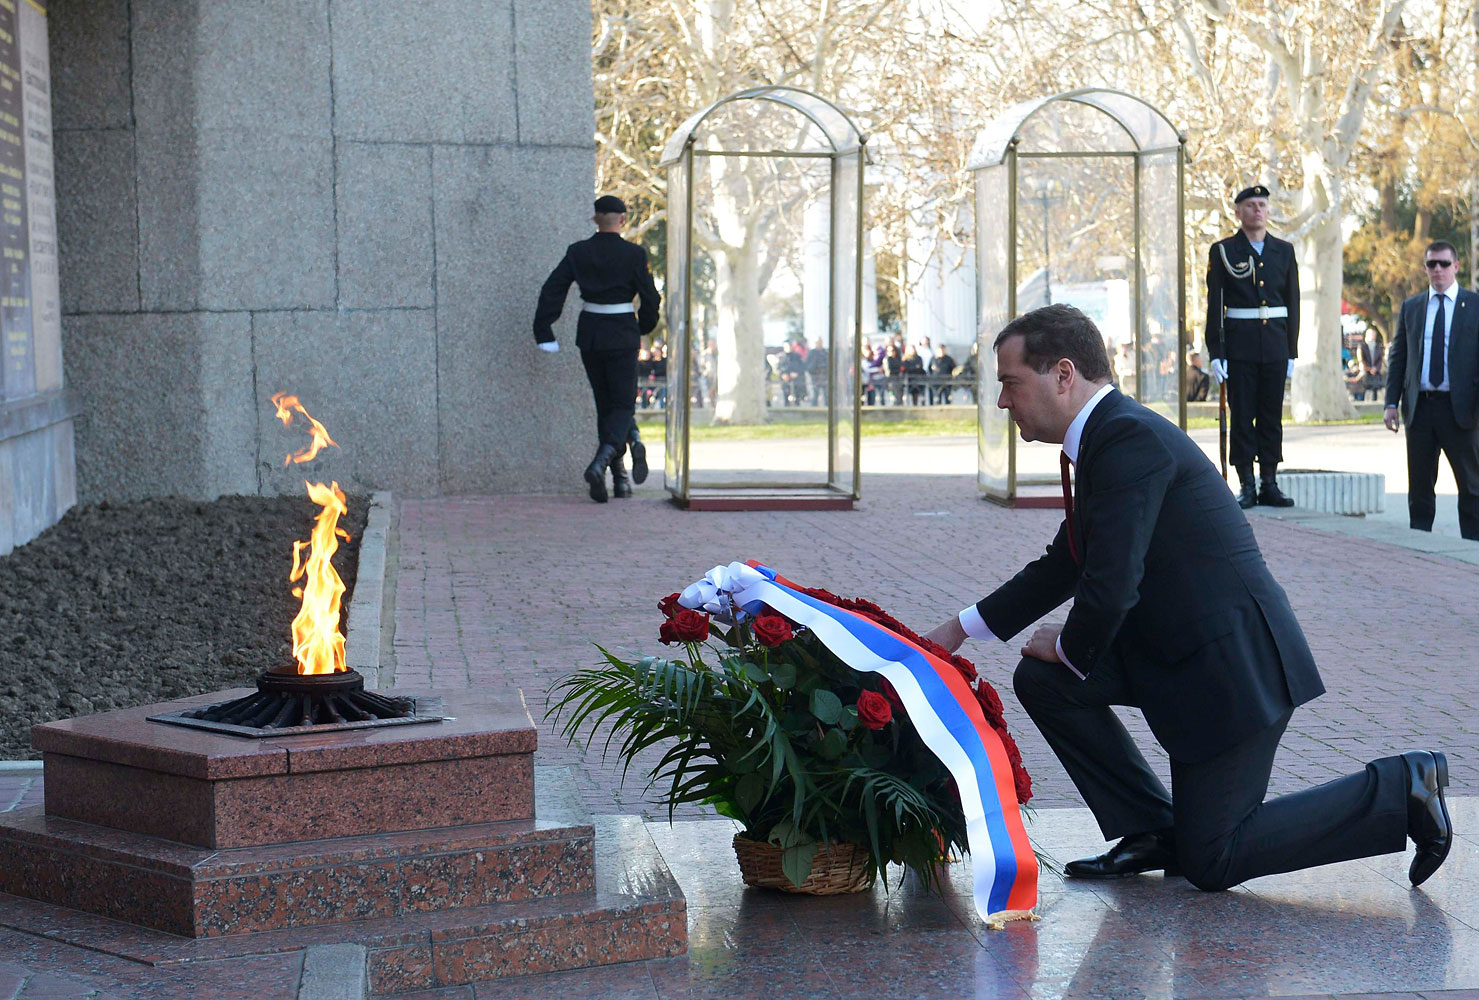 Russia's Prime Minister Dmitry Medvedev takes part in a wreath laying ceremony at the World War Two Memorial to Heroic Defence of Sevastopol in Sevastopol, March 31, 2014.